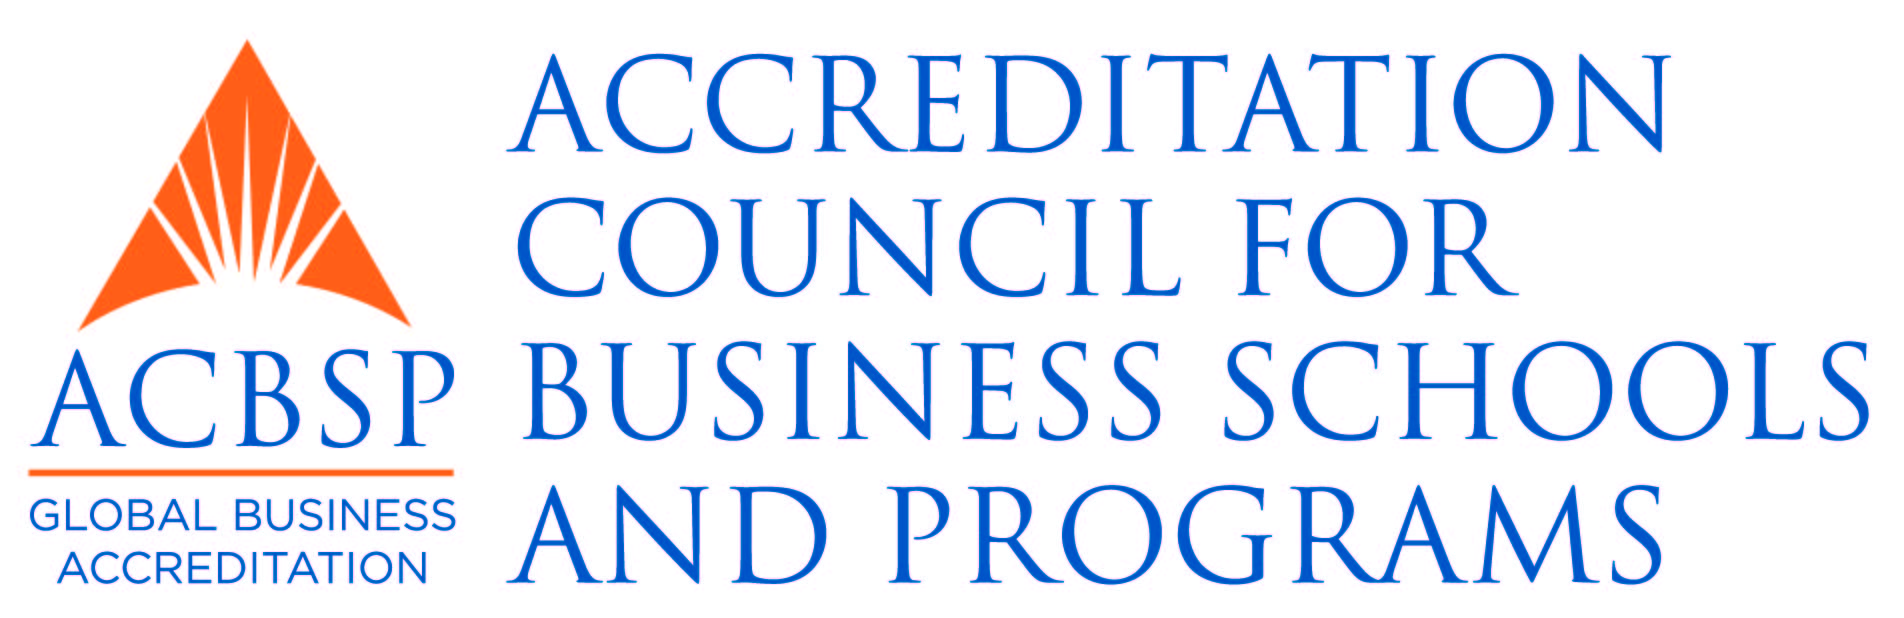 The logo for the Accreditation Council for Business Schools and Programs (ACBSP)